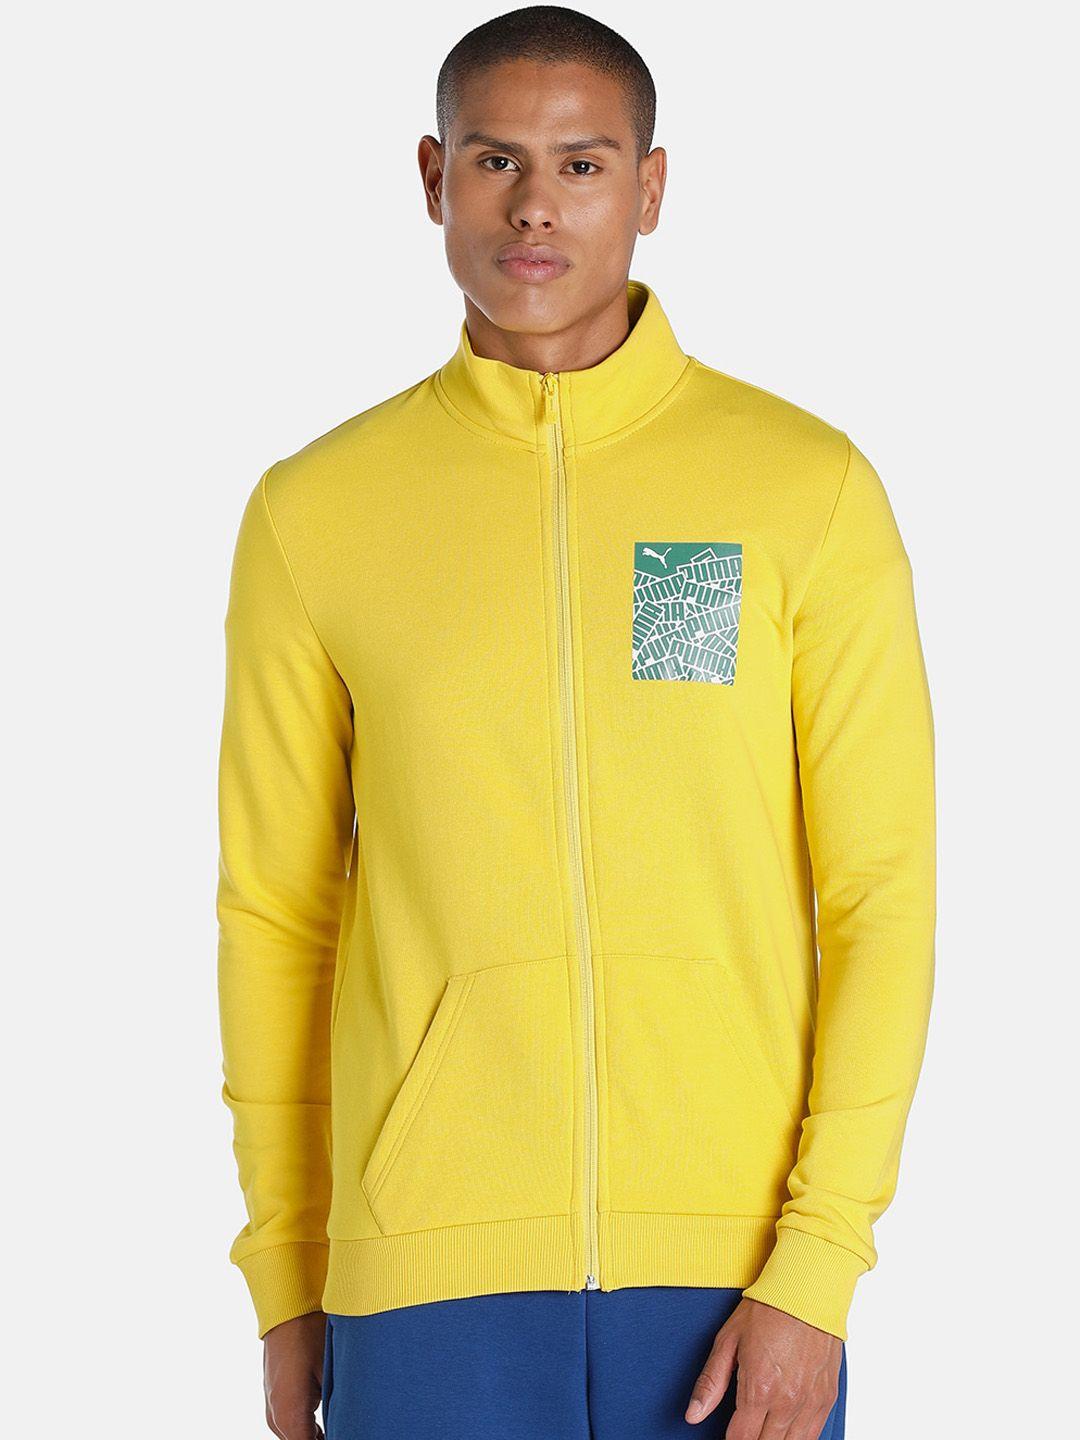 Puma Men Yellow Graphic Logo Outdoor Sporty Jacket with Patchwork